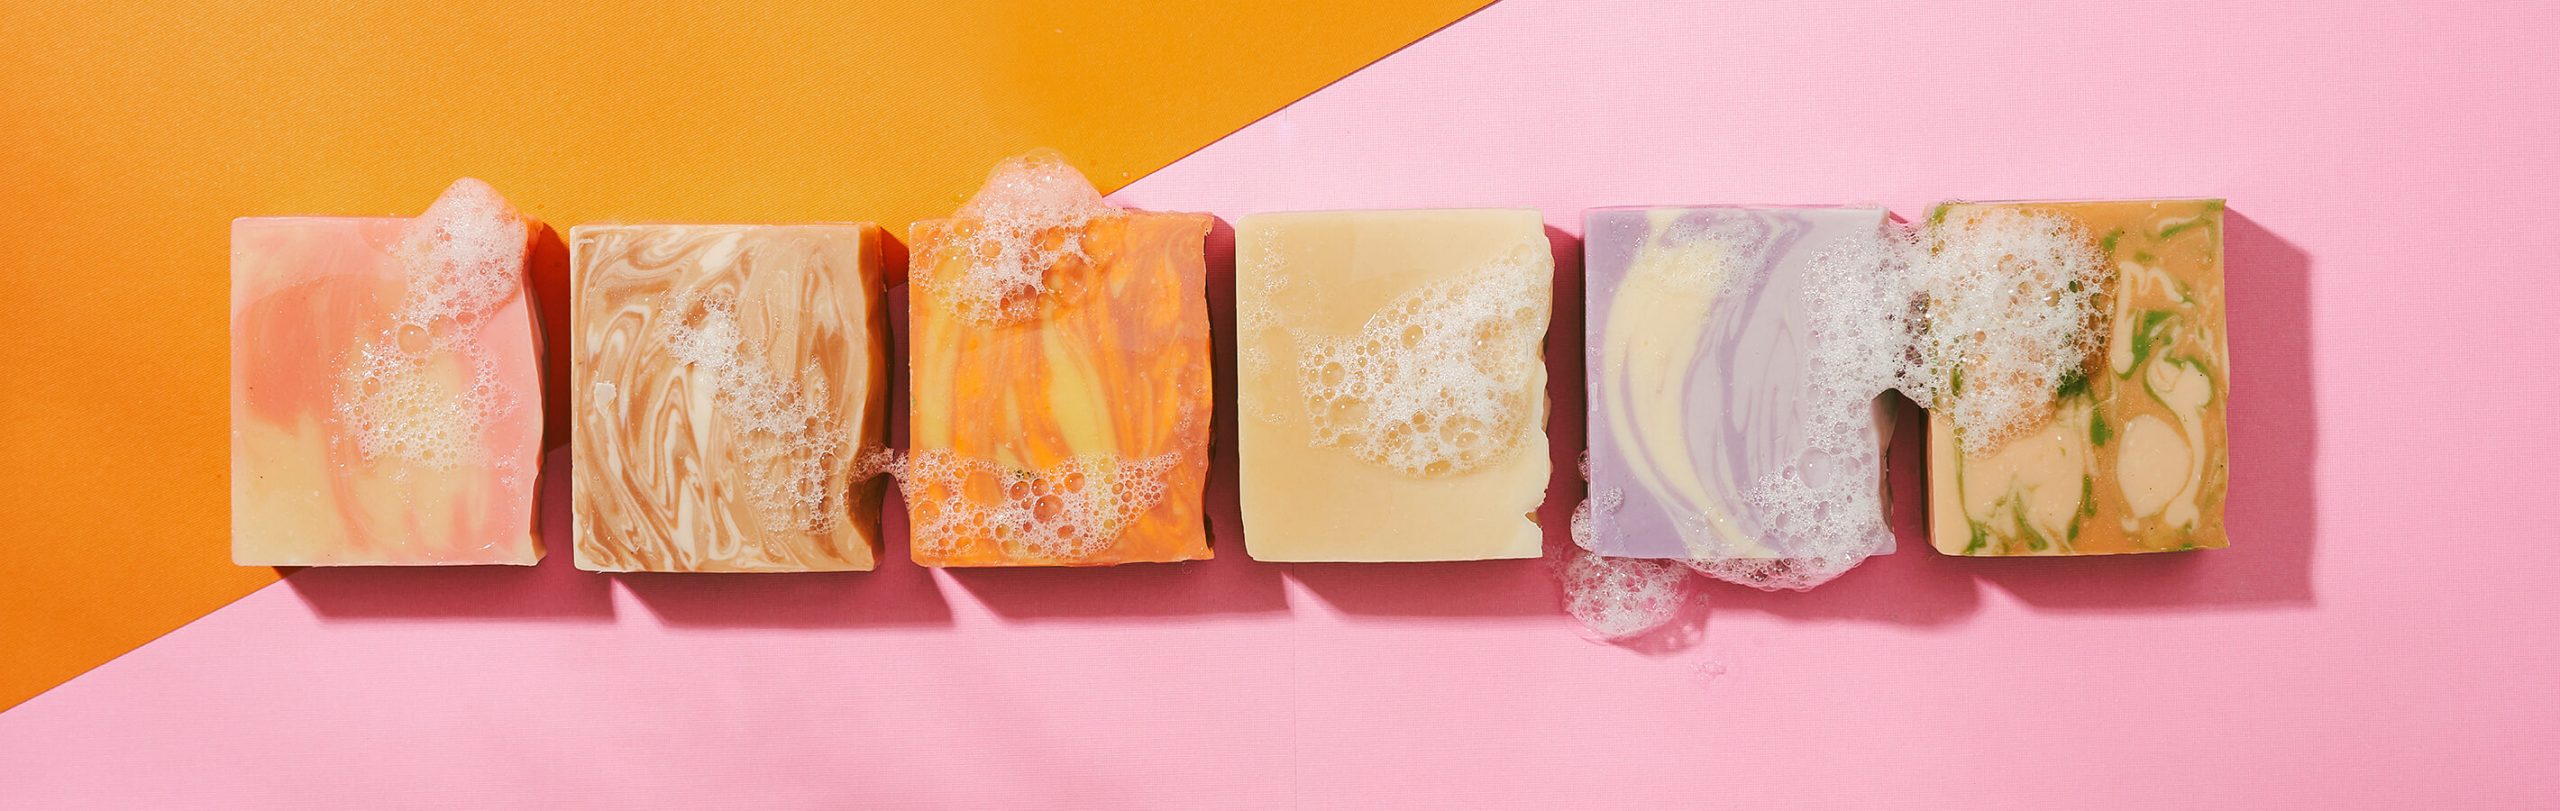 A line up of Brand The Boldest Co’s soap bars on a pink/orange paper background